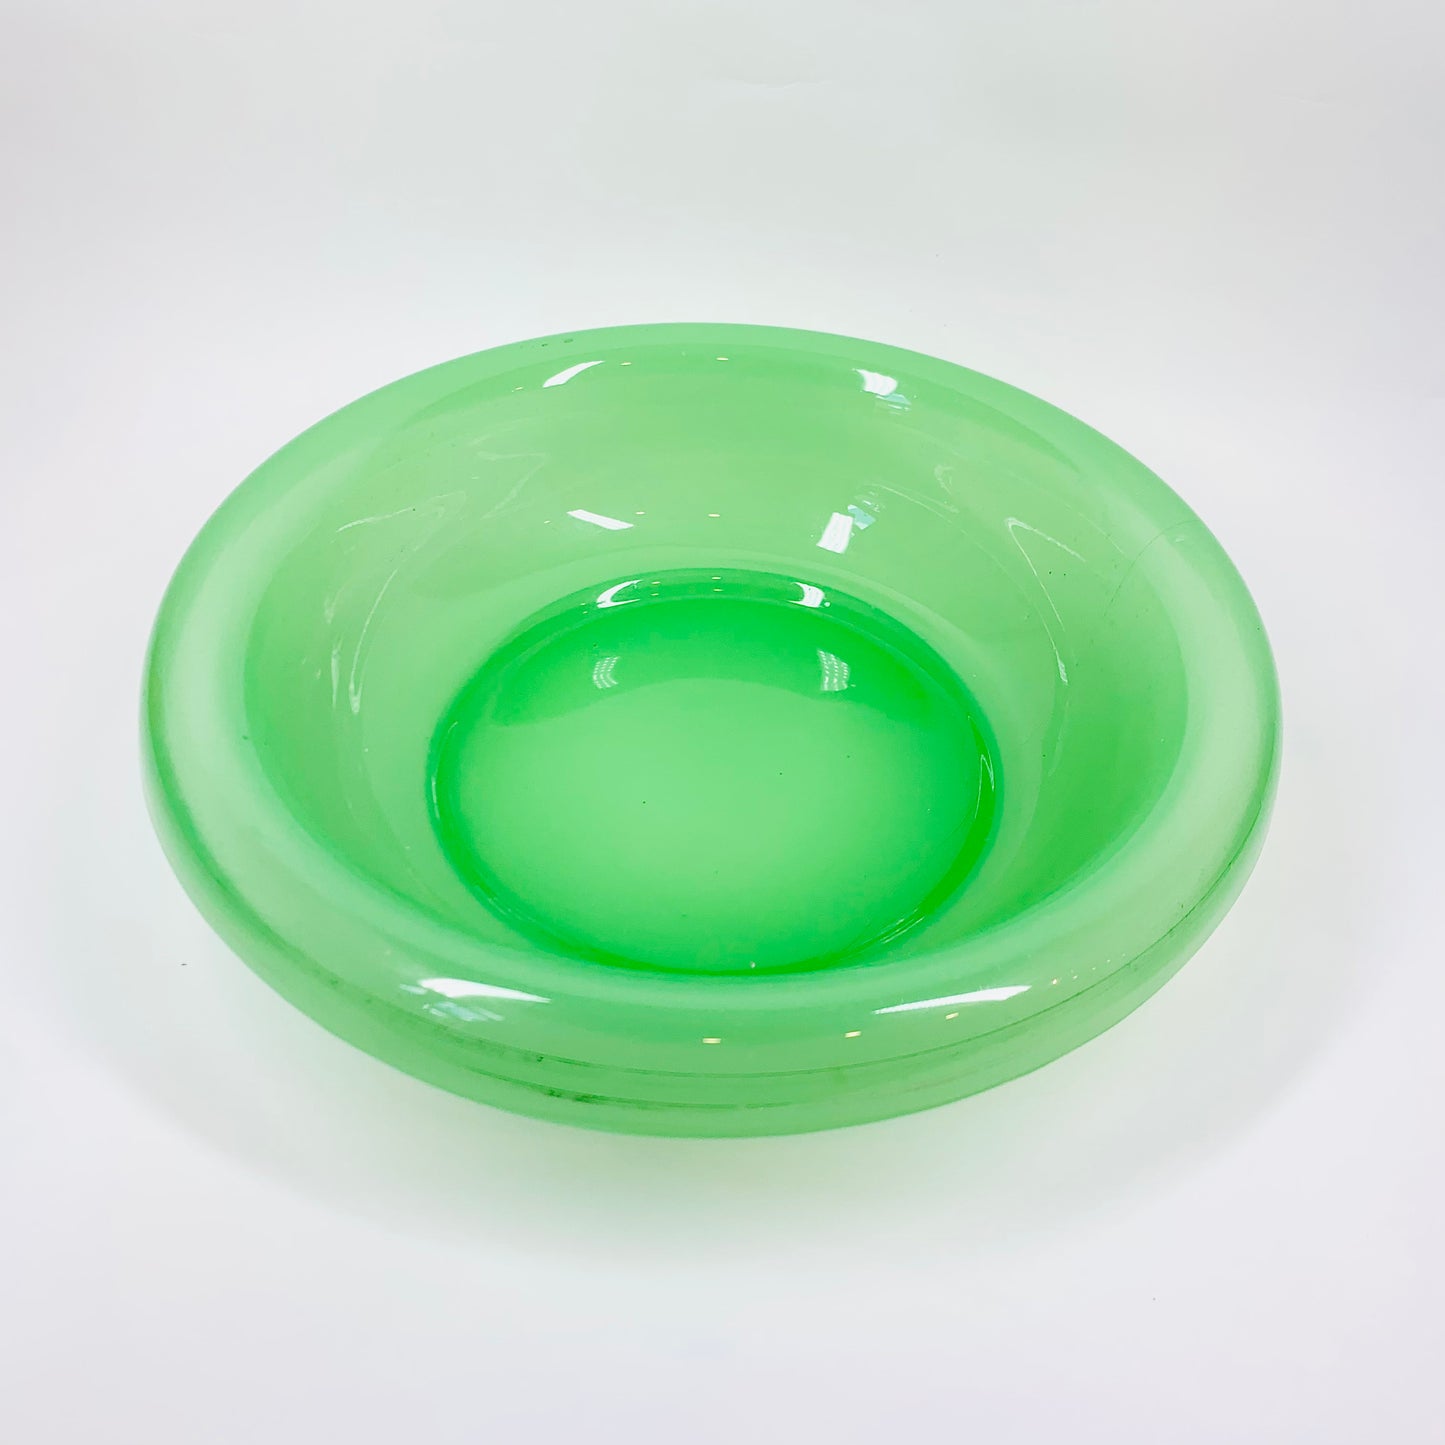 Extremely rare large antique French green opaline glass bowl